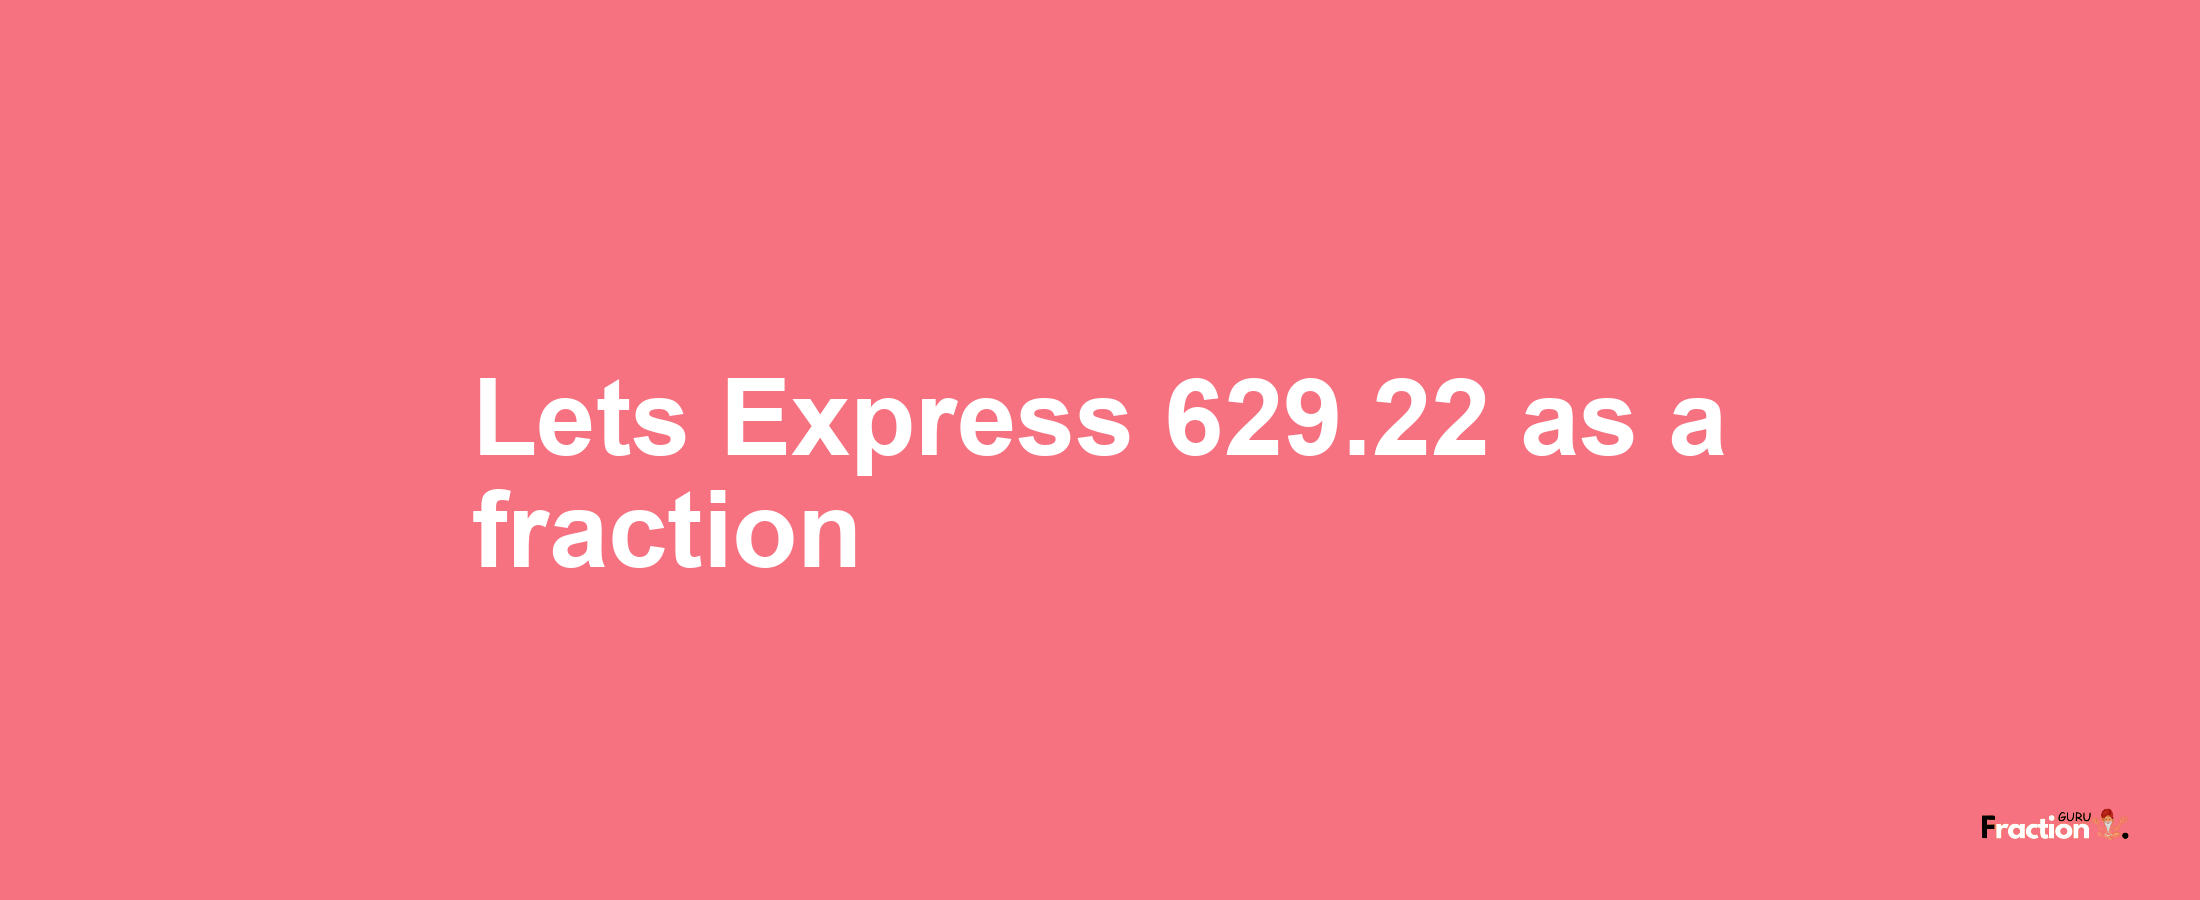 Lets Express 629.22 as afraction